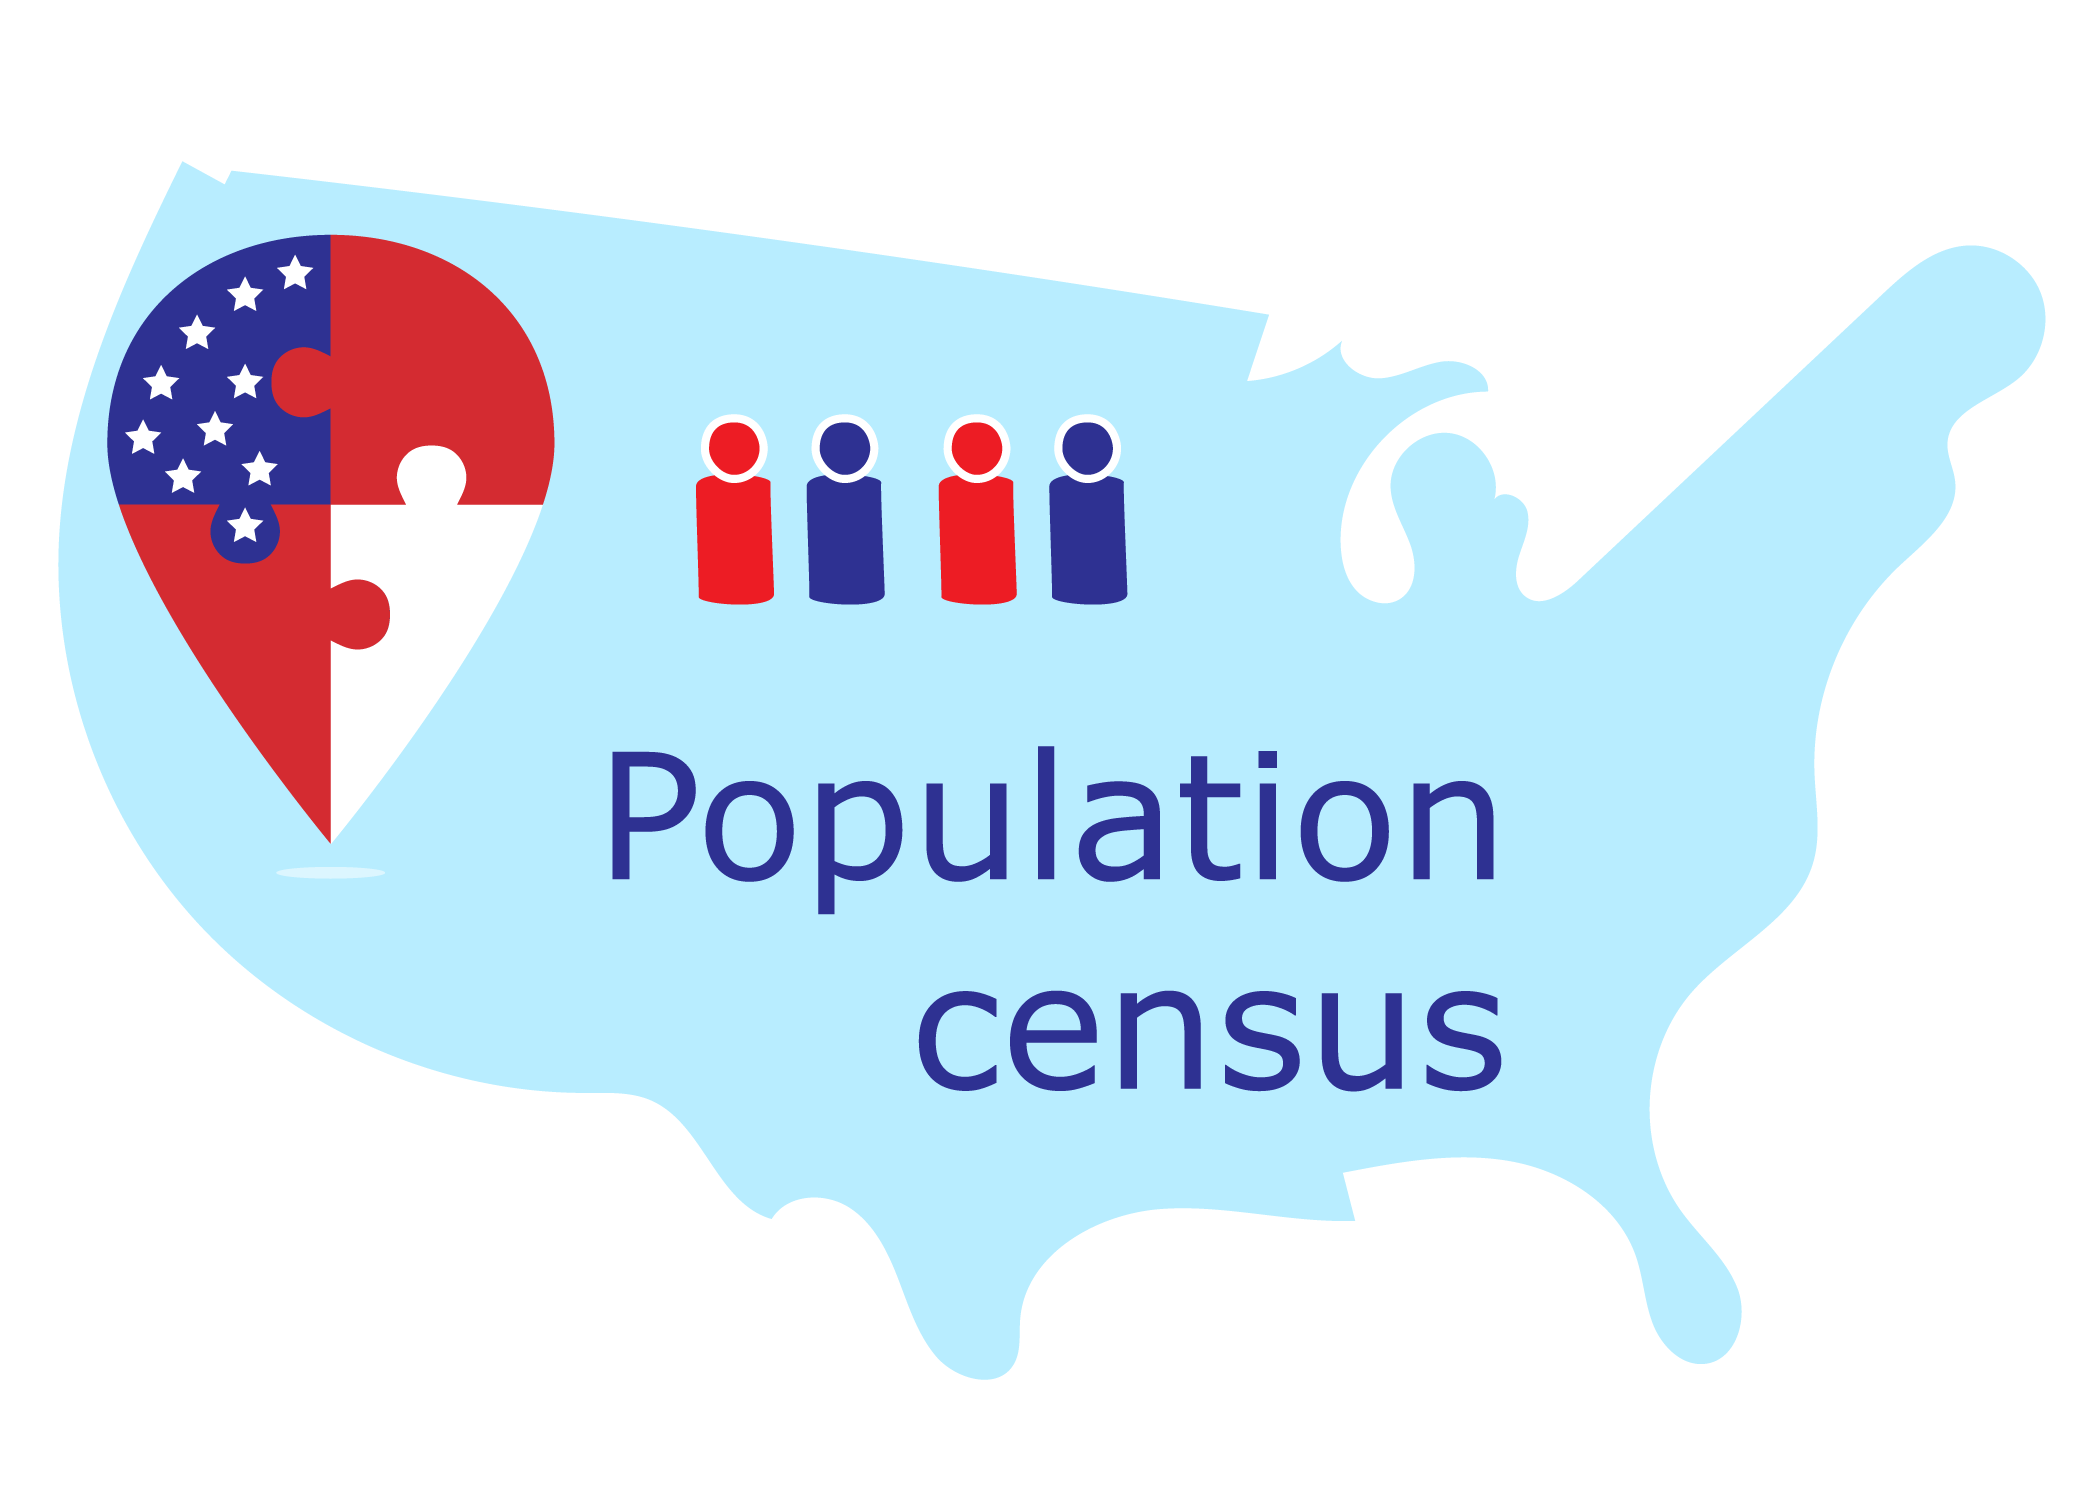 Population Census in the USA Map